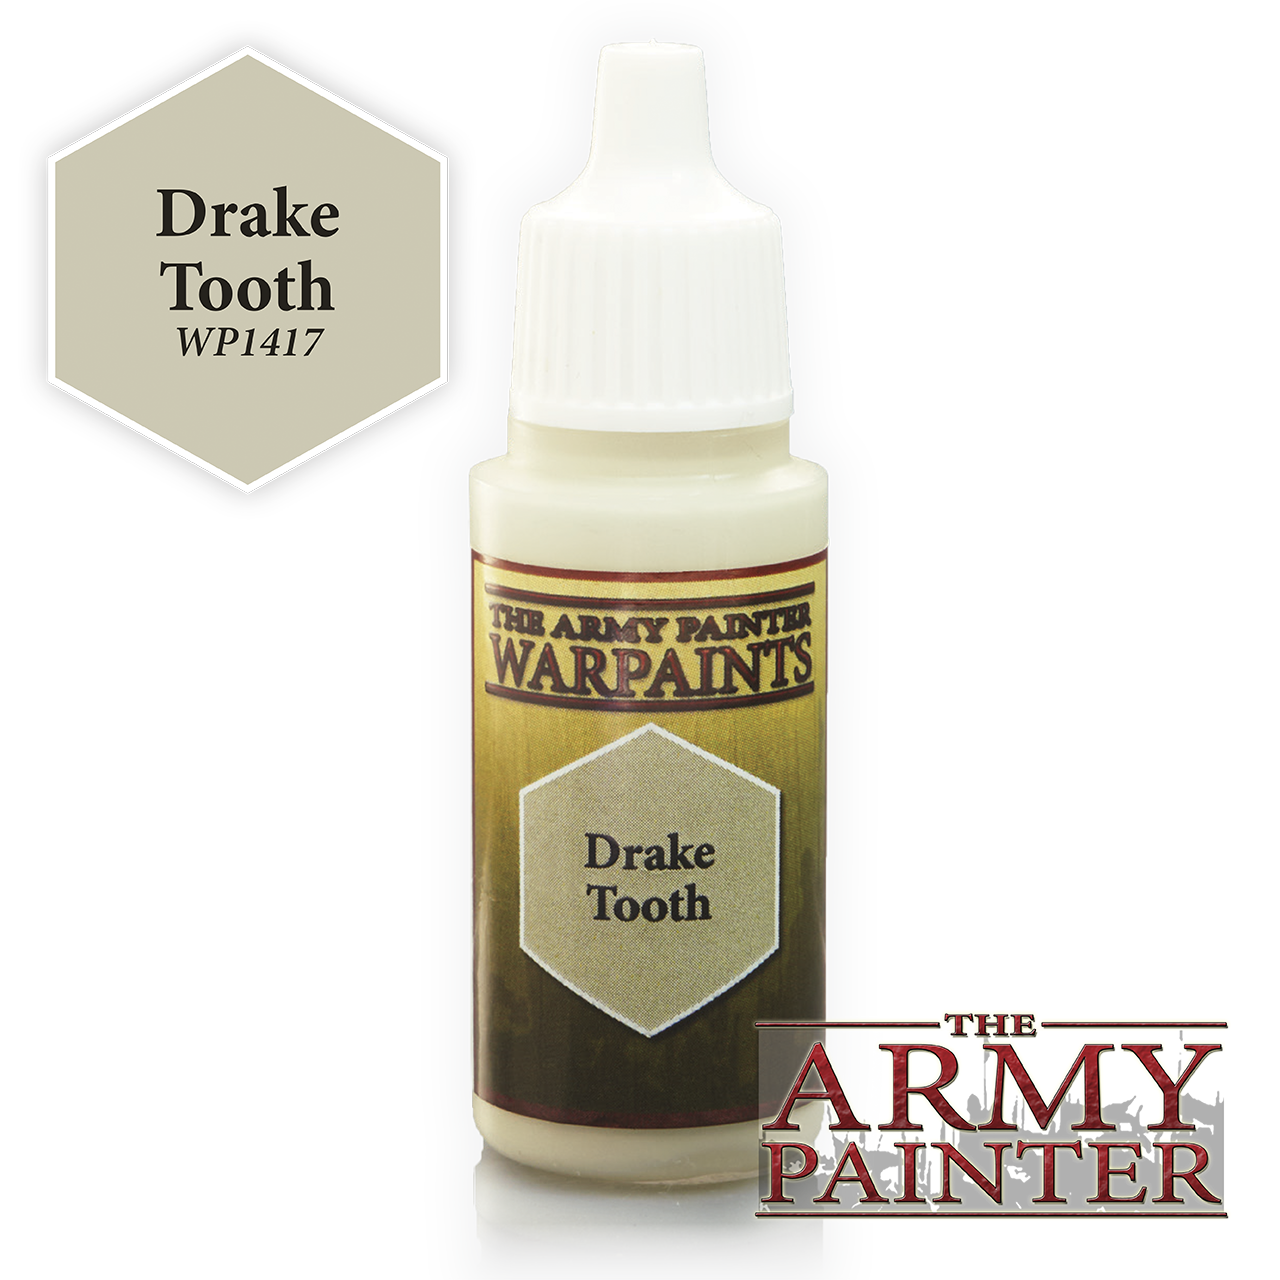 The Army Painter Warpaints: Drake Tooth (18ml)